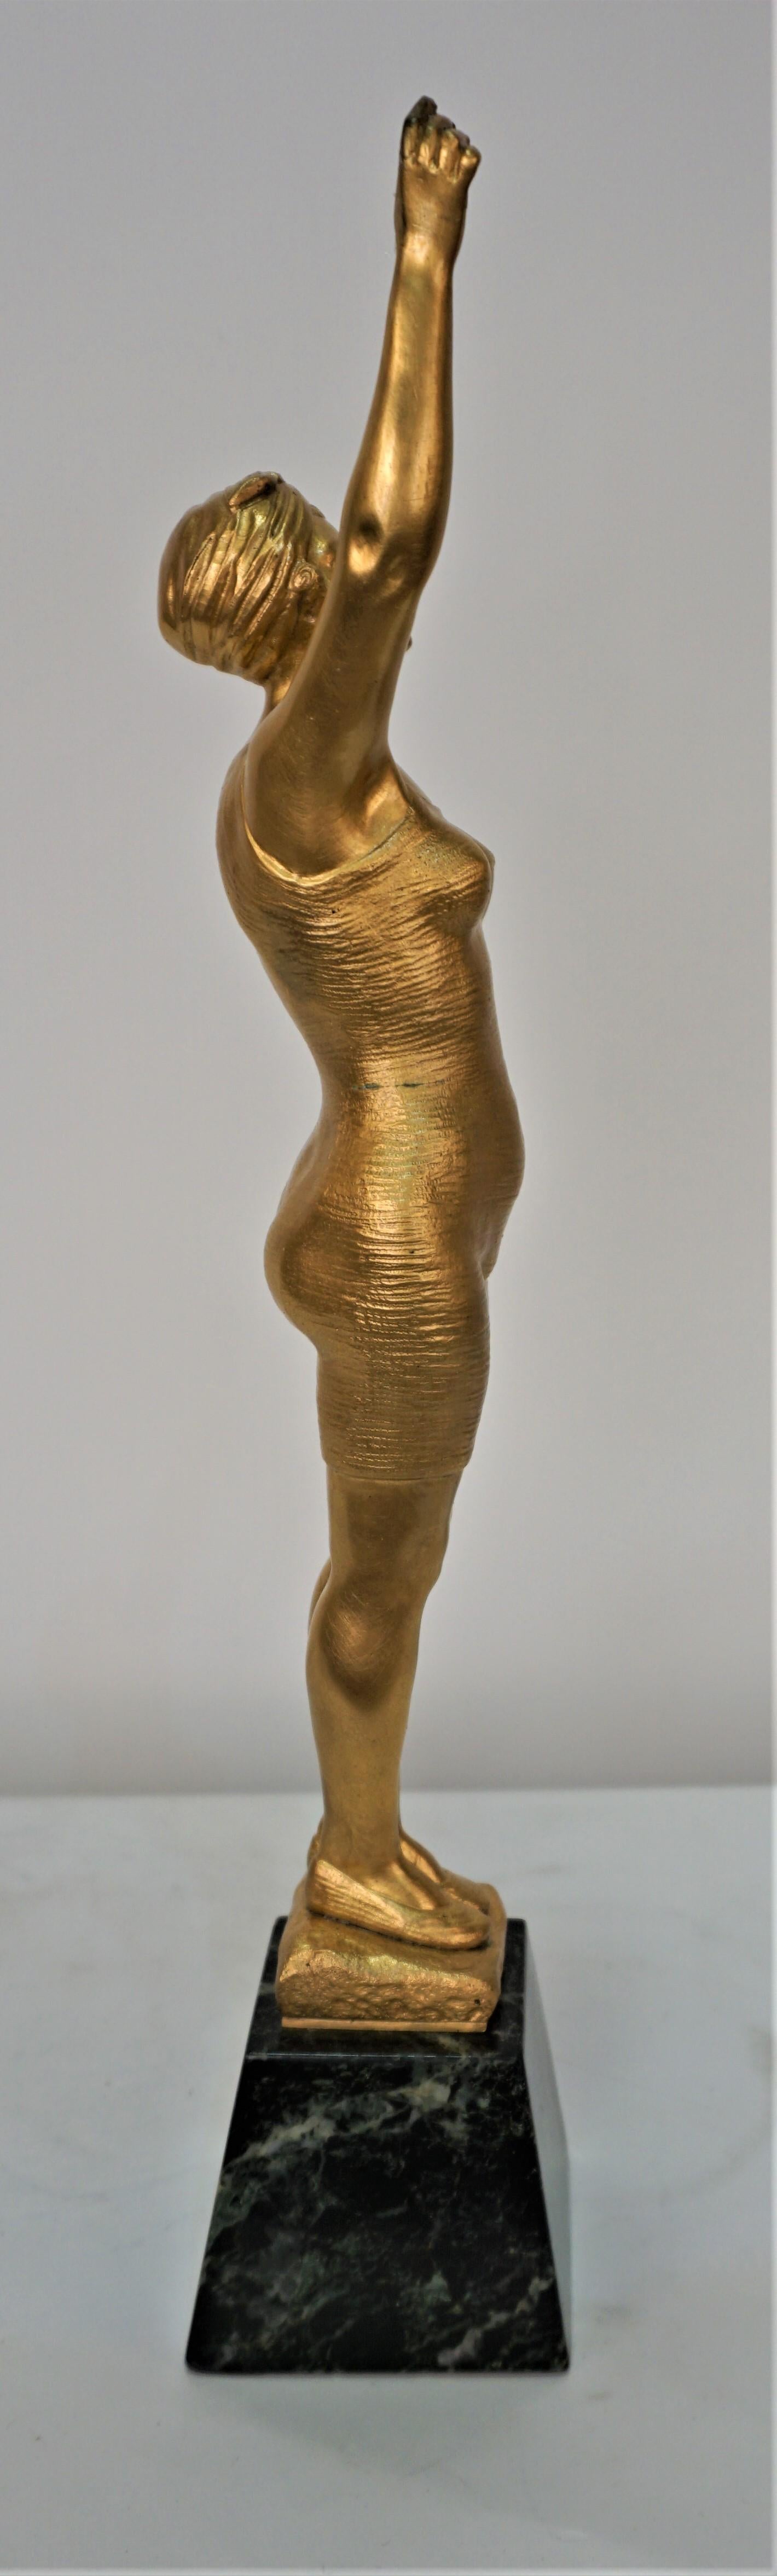 20th Century Dore Bronze Female Swimmer by George Omerth, 1895-1925 For Sale